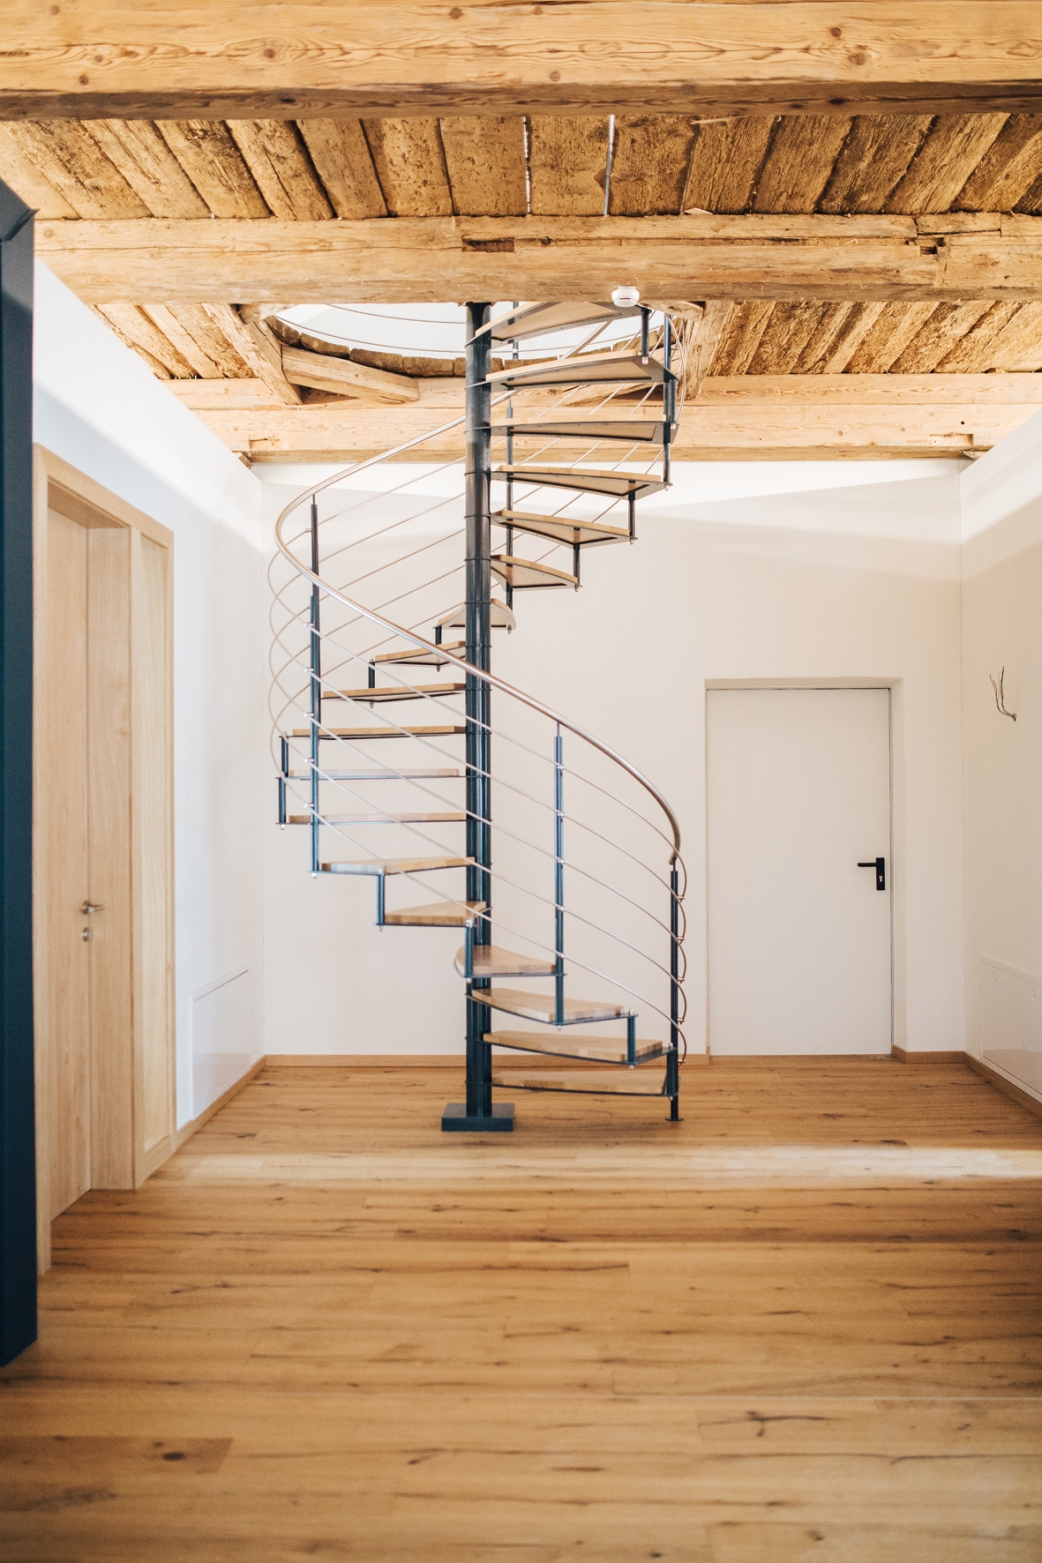 Ceiling old – floor new: the spiral staircase delicately merges the two worlds